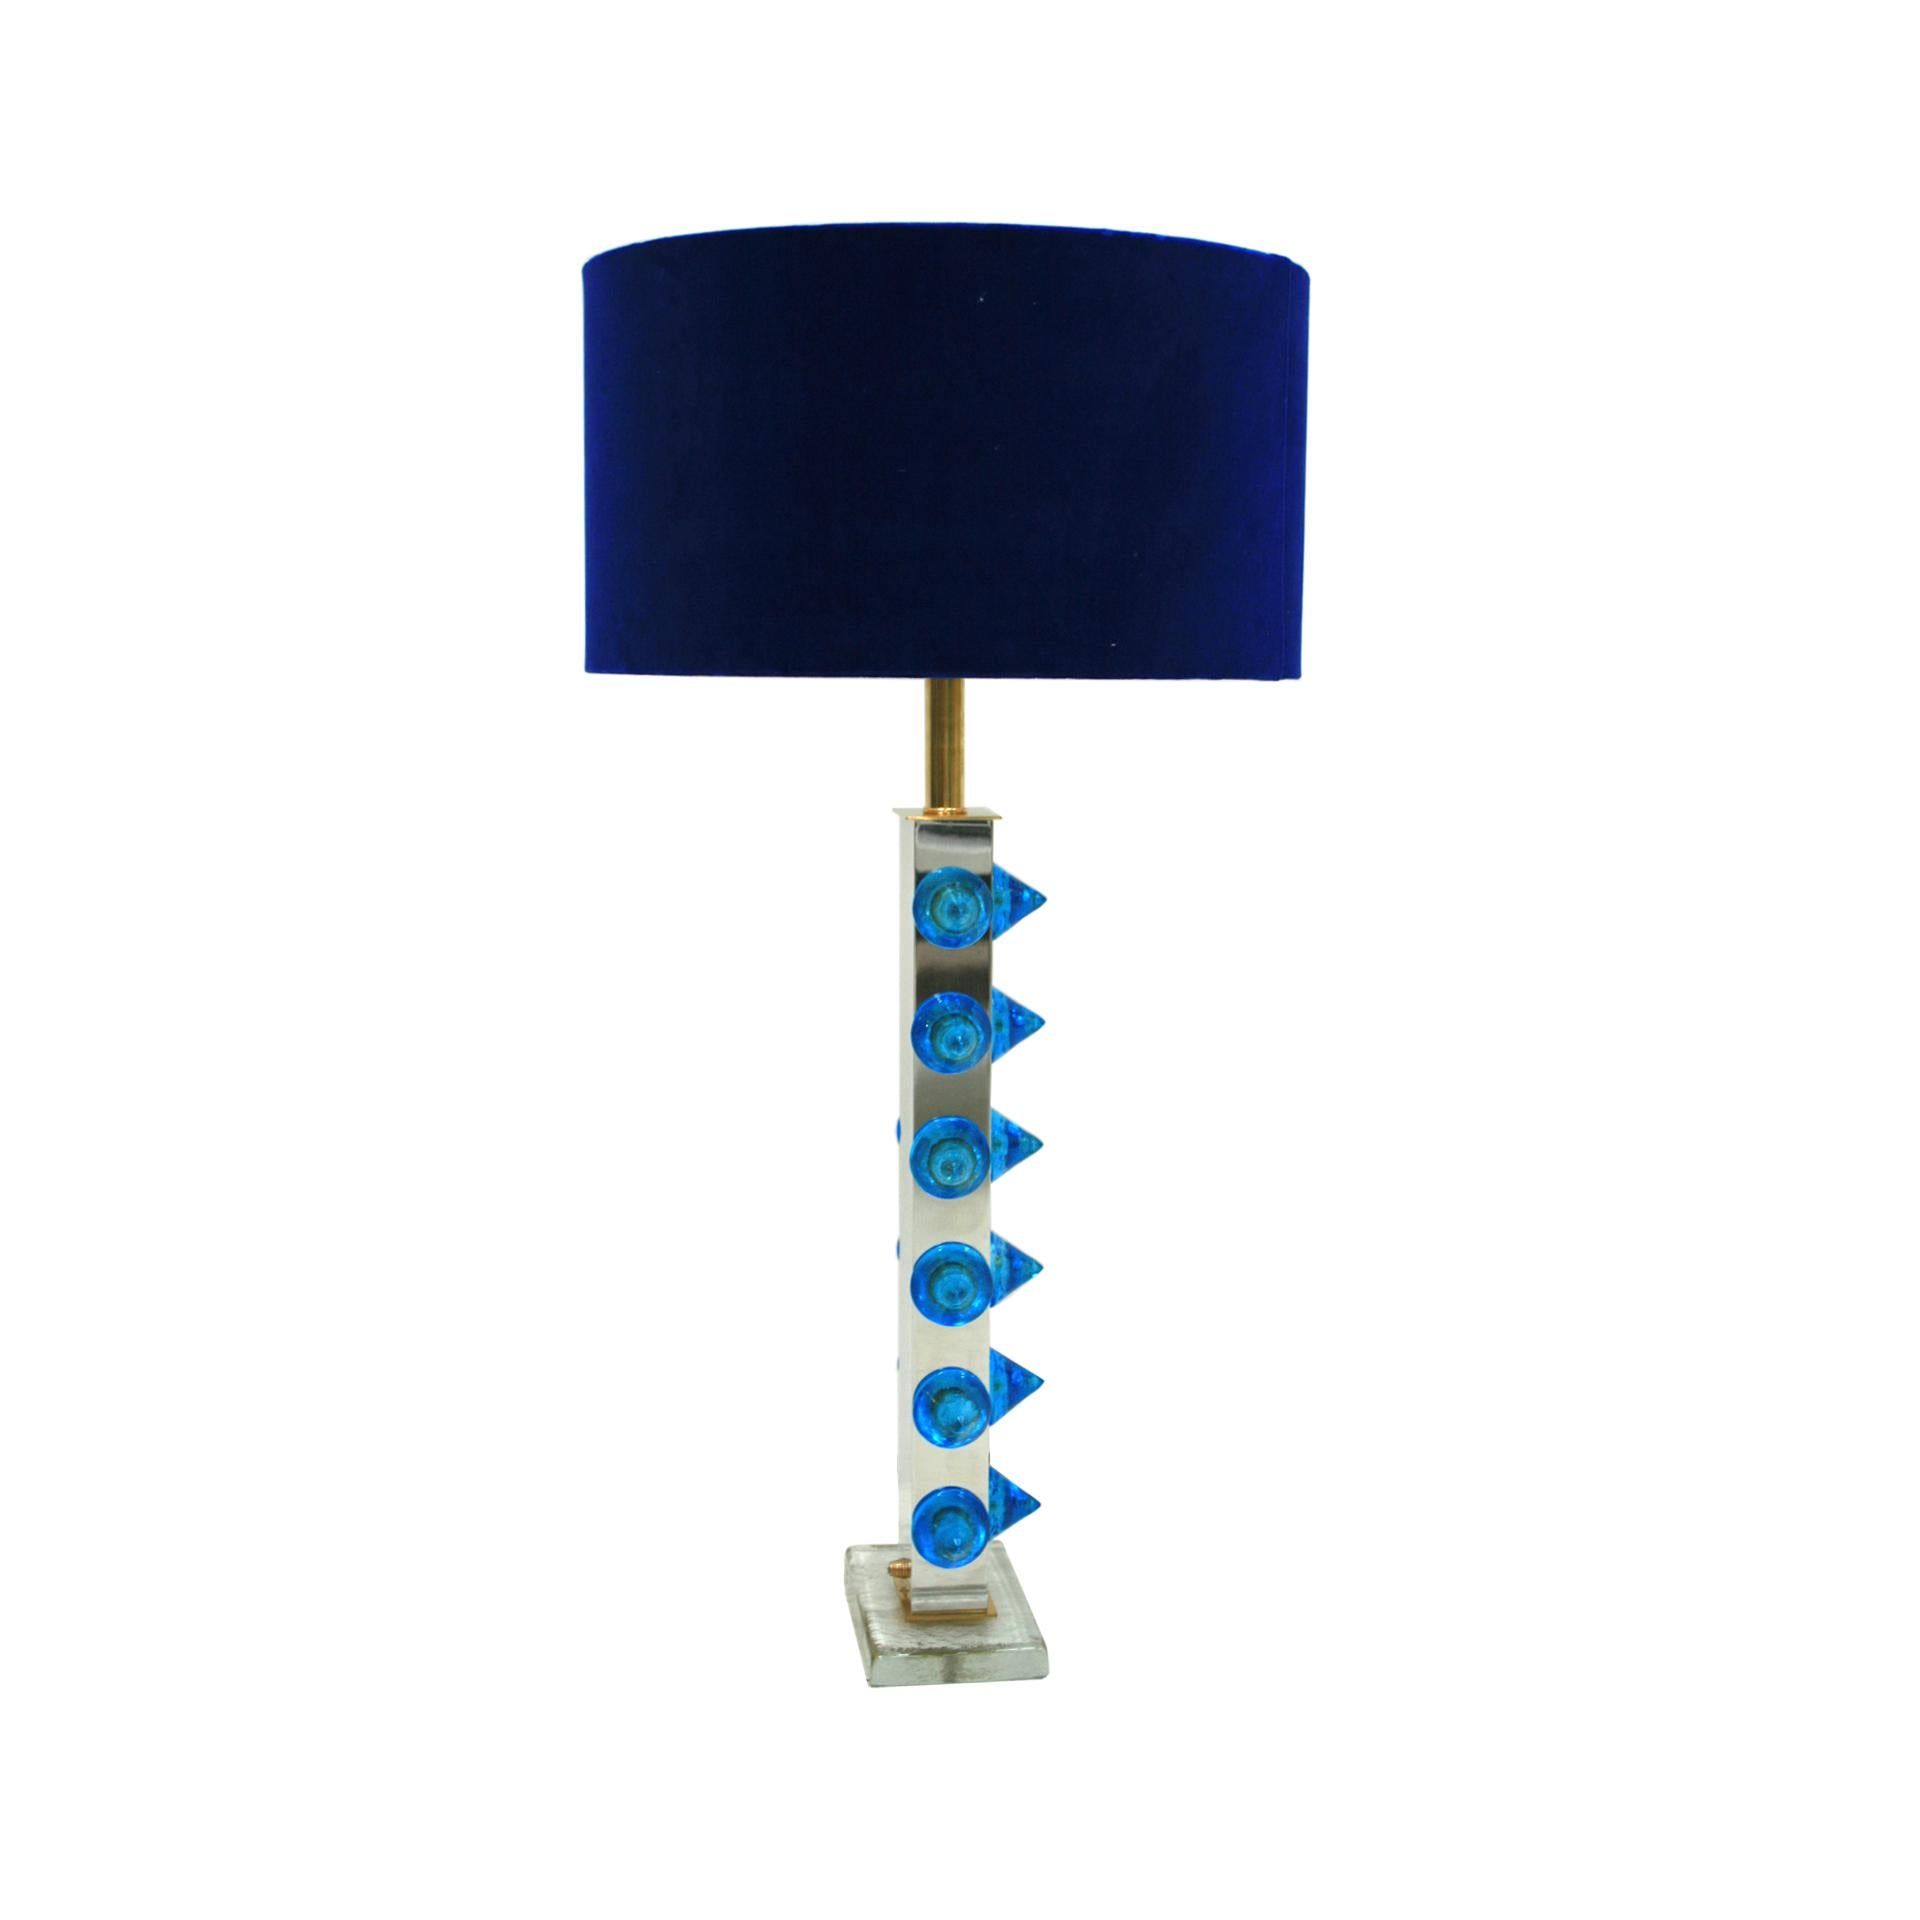 L.A. Studio Table Lamps with Colored Murano Glass In Good Condition For Sale In Ibiza, Spain